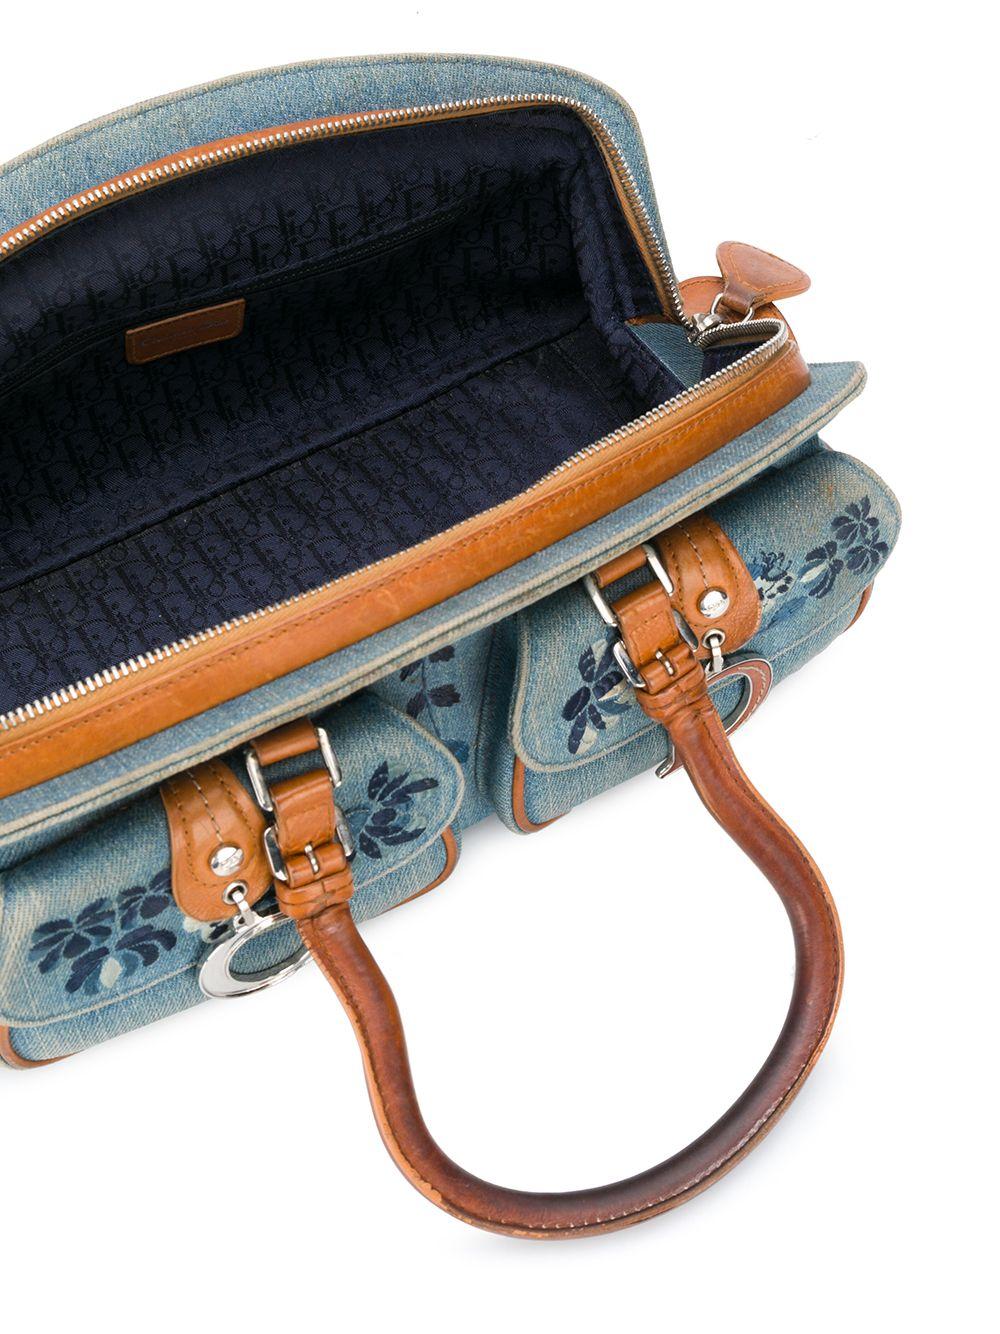 2006s Christian Dior blue jean embroidered floral handbag featuring camel leather trim, two rounded top handles, top zip fastening, floral embroideries, logo charm, front pockets, Monogram lining.
Width 11.8in. (30cm) 
Height 5.5in. (14cm)
Depth